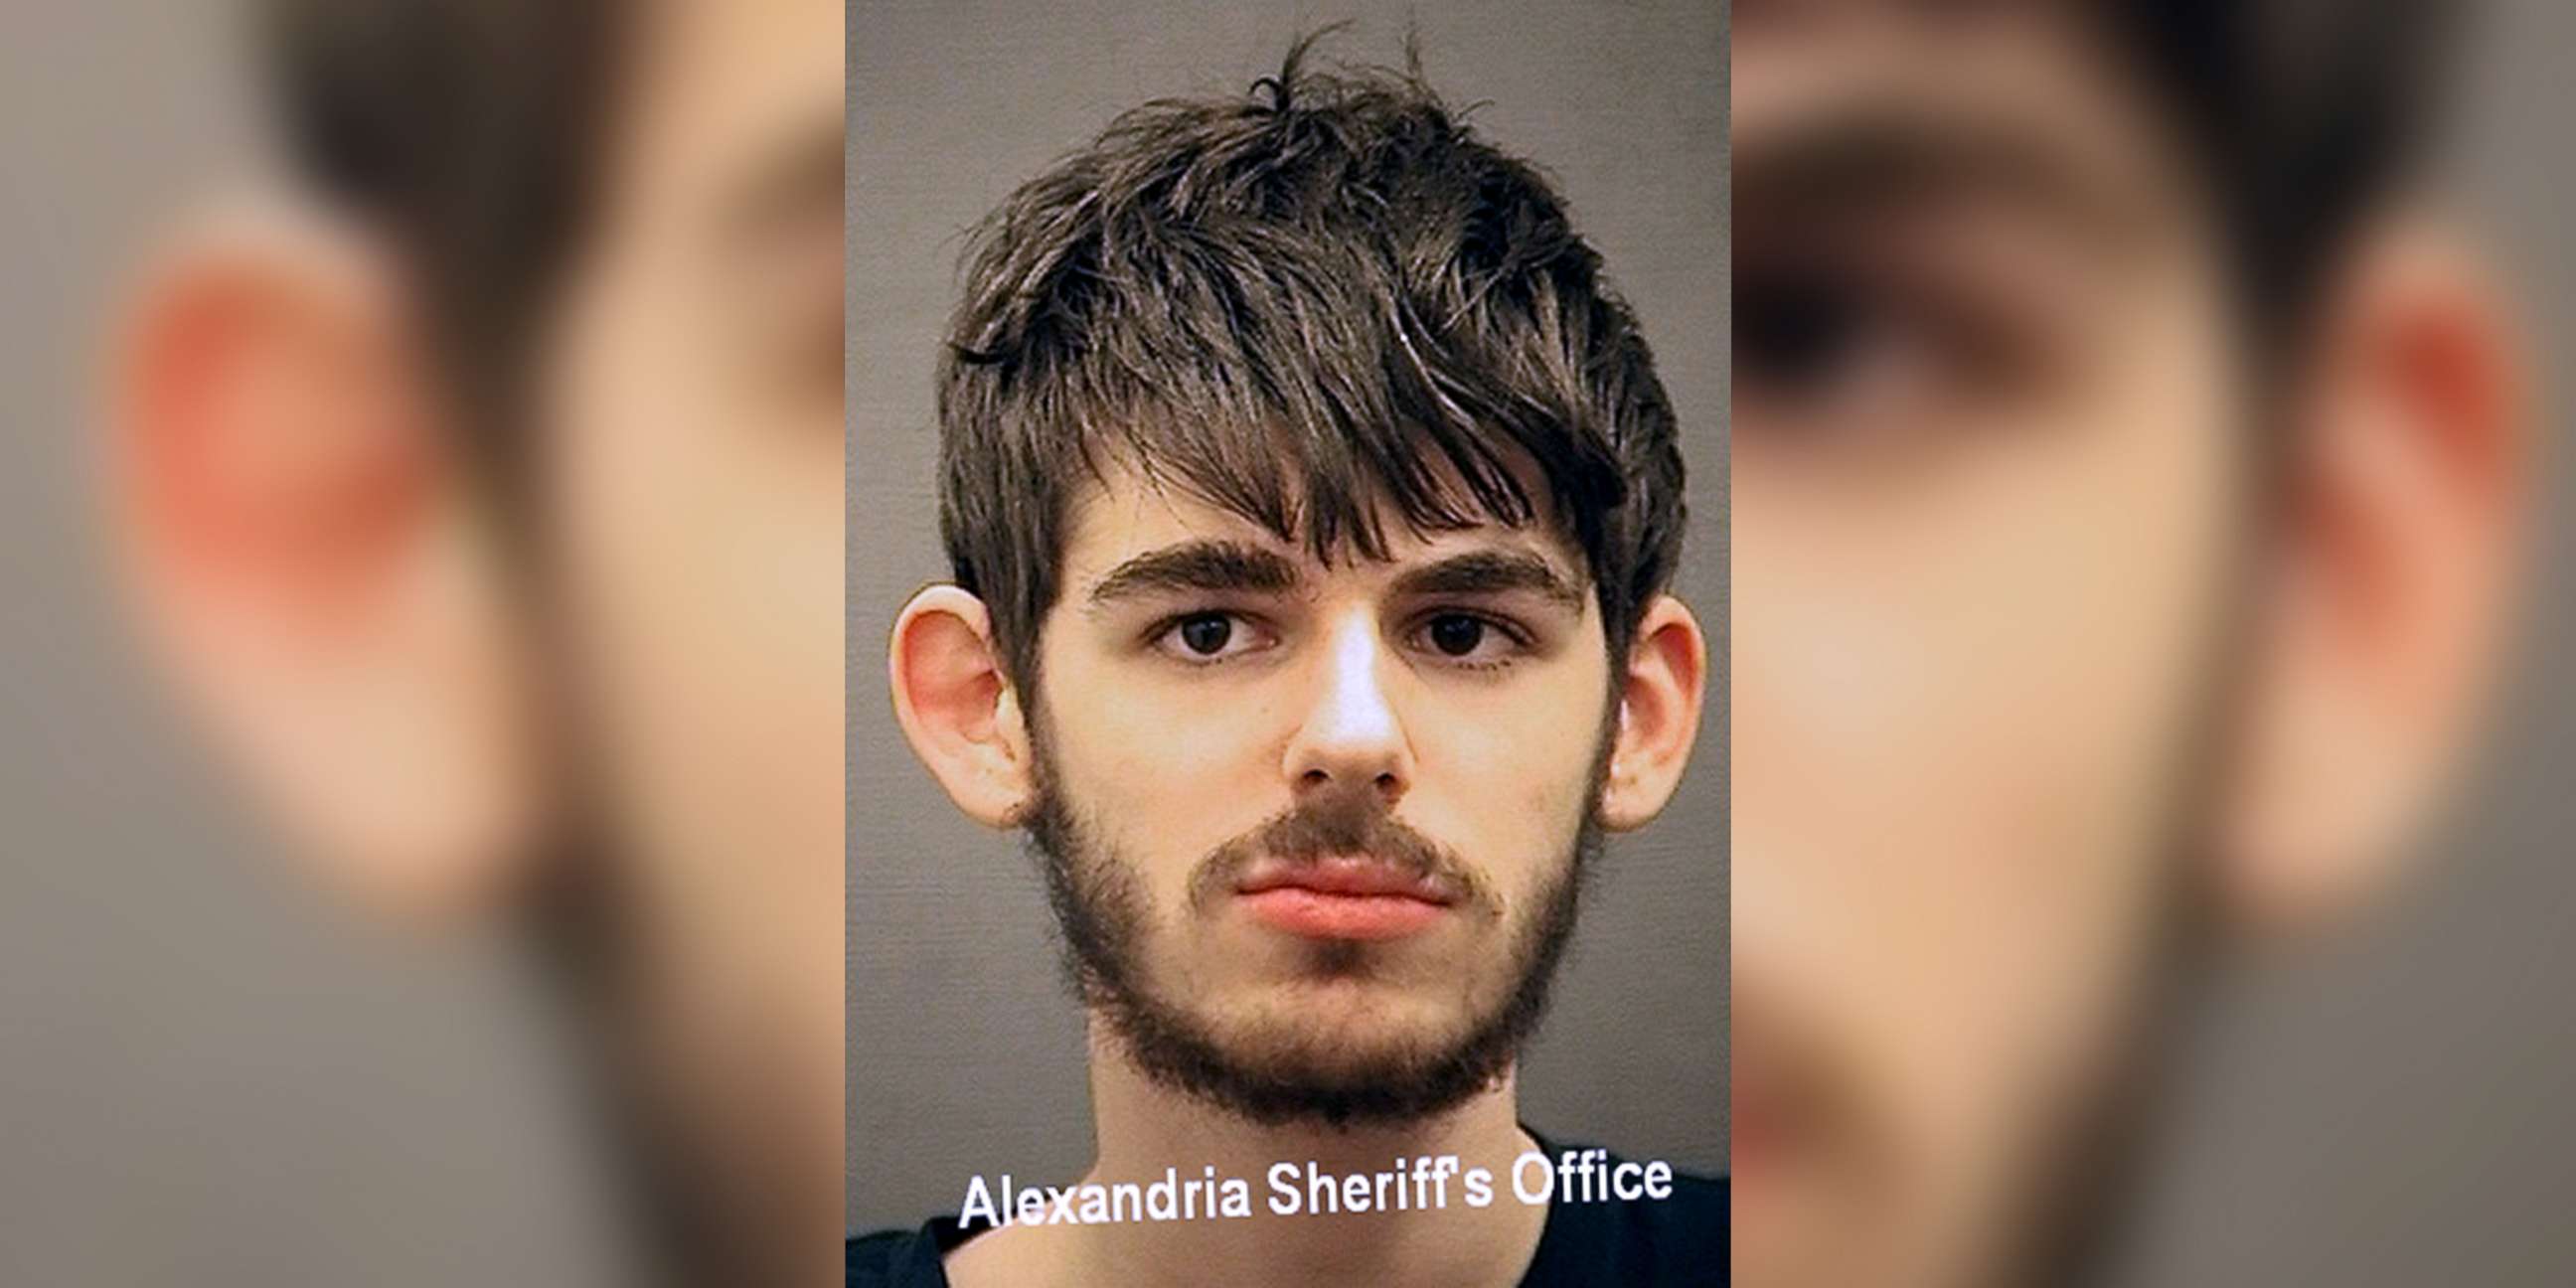 PHOTO: An undated photo shows John William Kirby Kelley, 19, who was arrested on Jan. 10, 2019, in connection with the swatting ring and charged with falsely reporting bomb threats and active shootings.